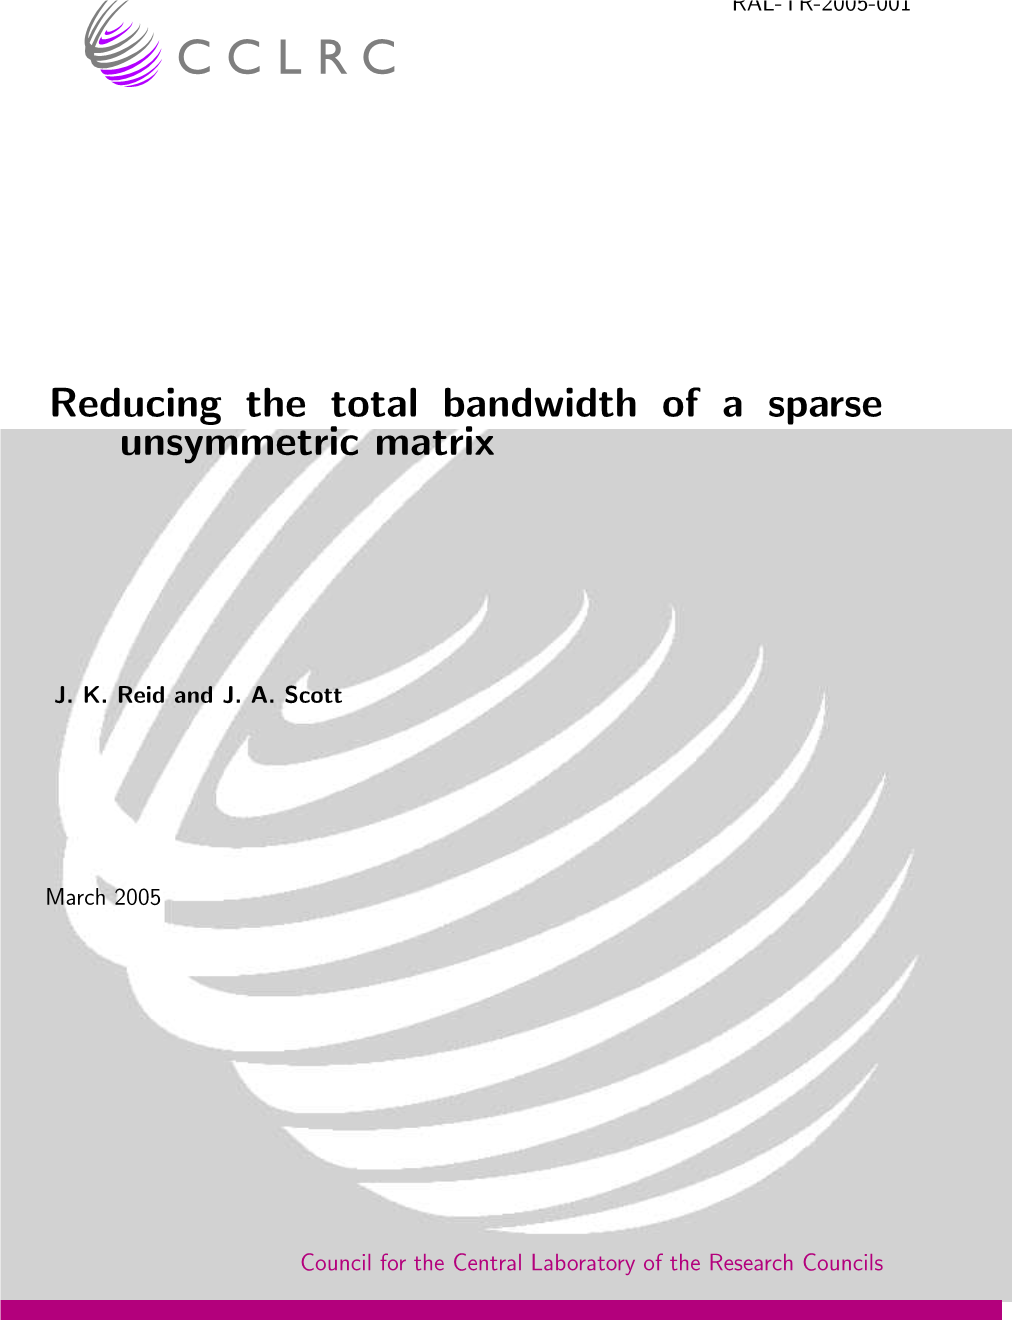 Reducing the Total Bandwidth of a Sparse Unsymmetric Matrix